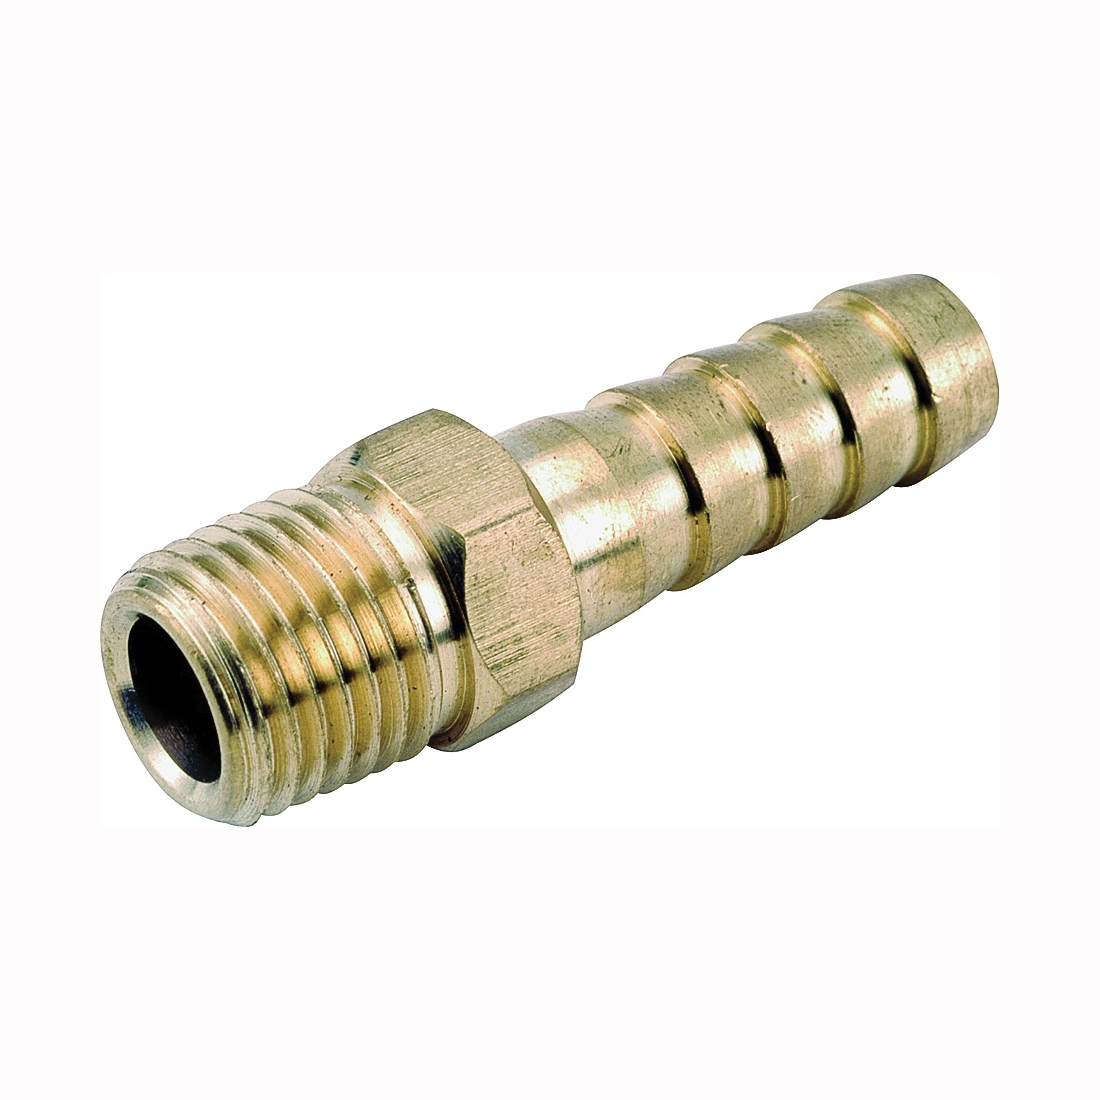 129 Series 757001-1208 Hose Adapter, 3/4 in, Barb, 1/2 in, MPT, Brass